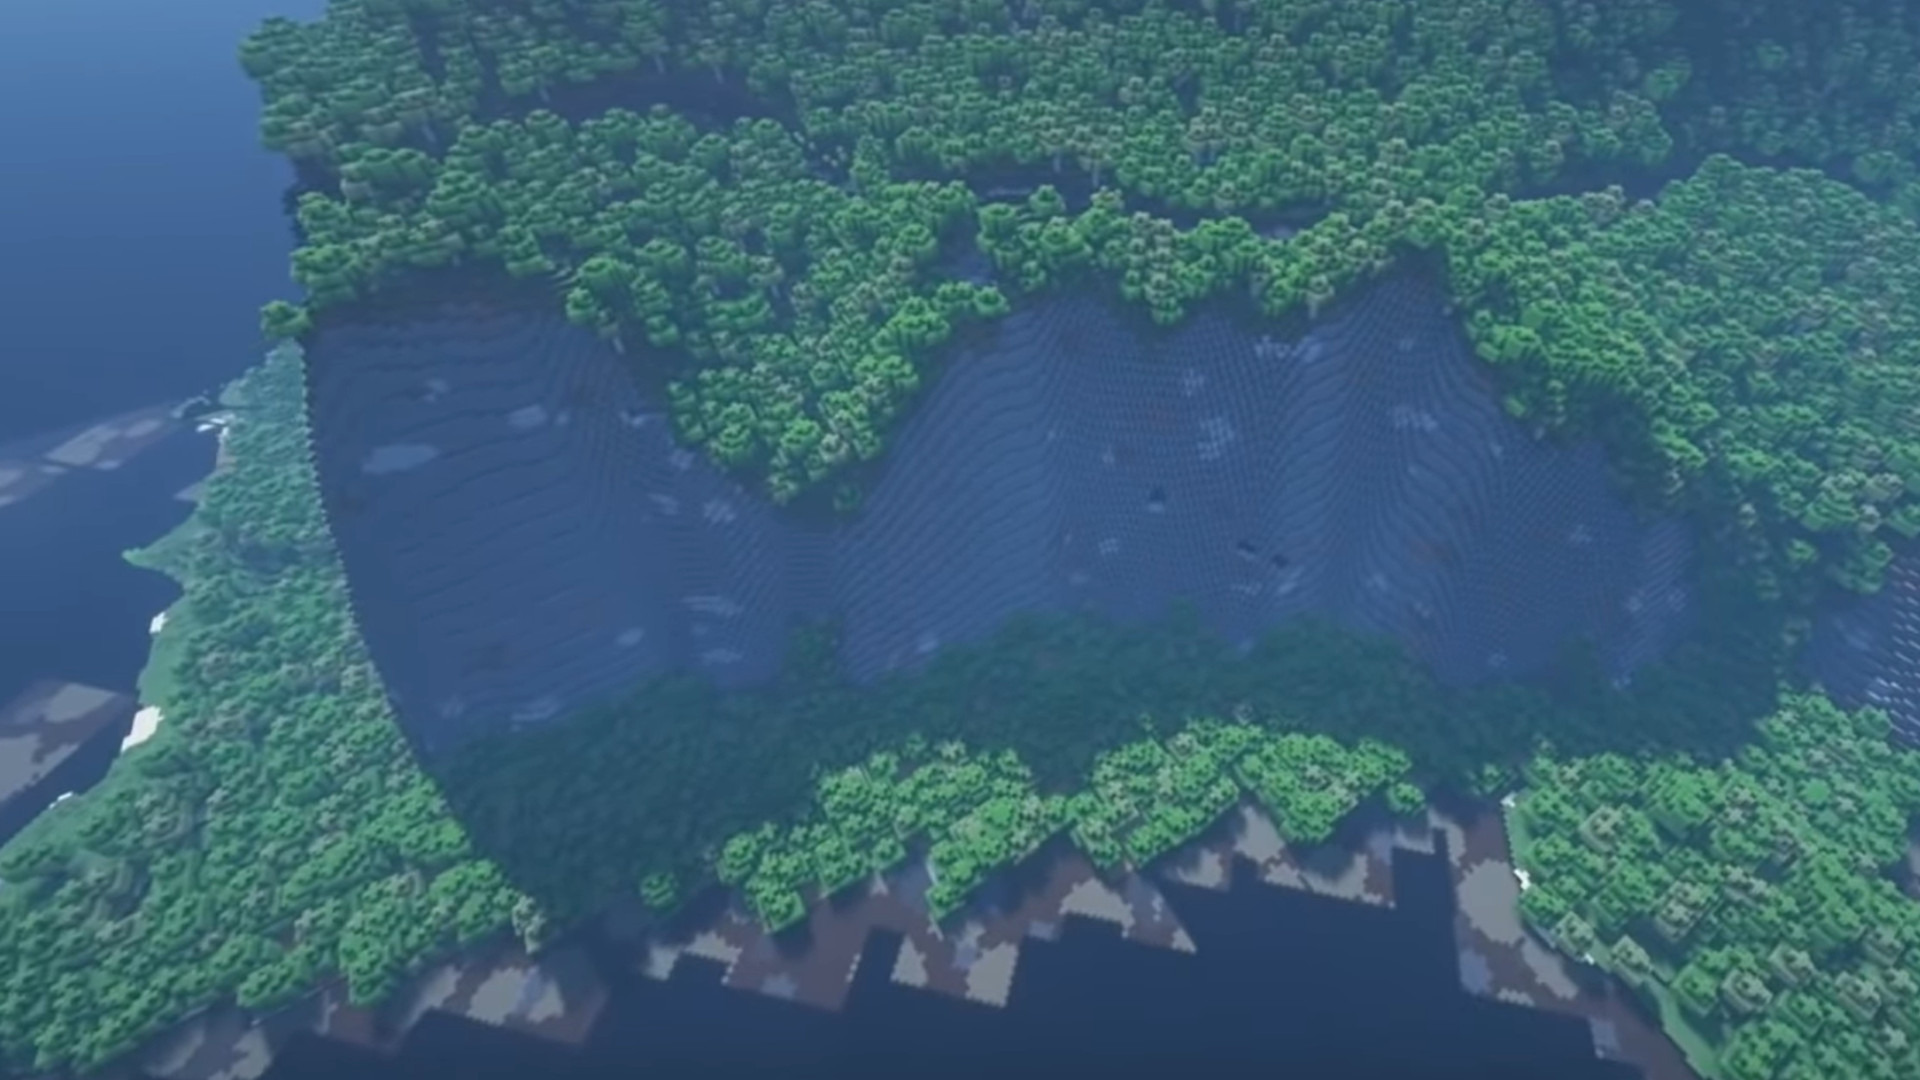 minecraft earth map to scale